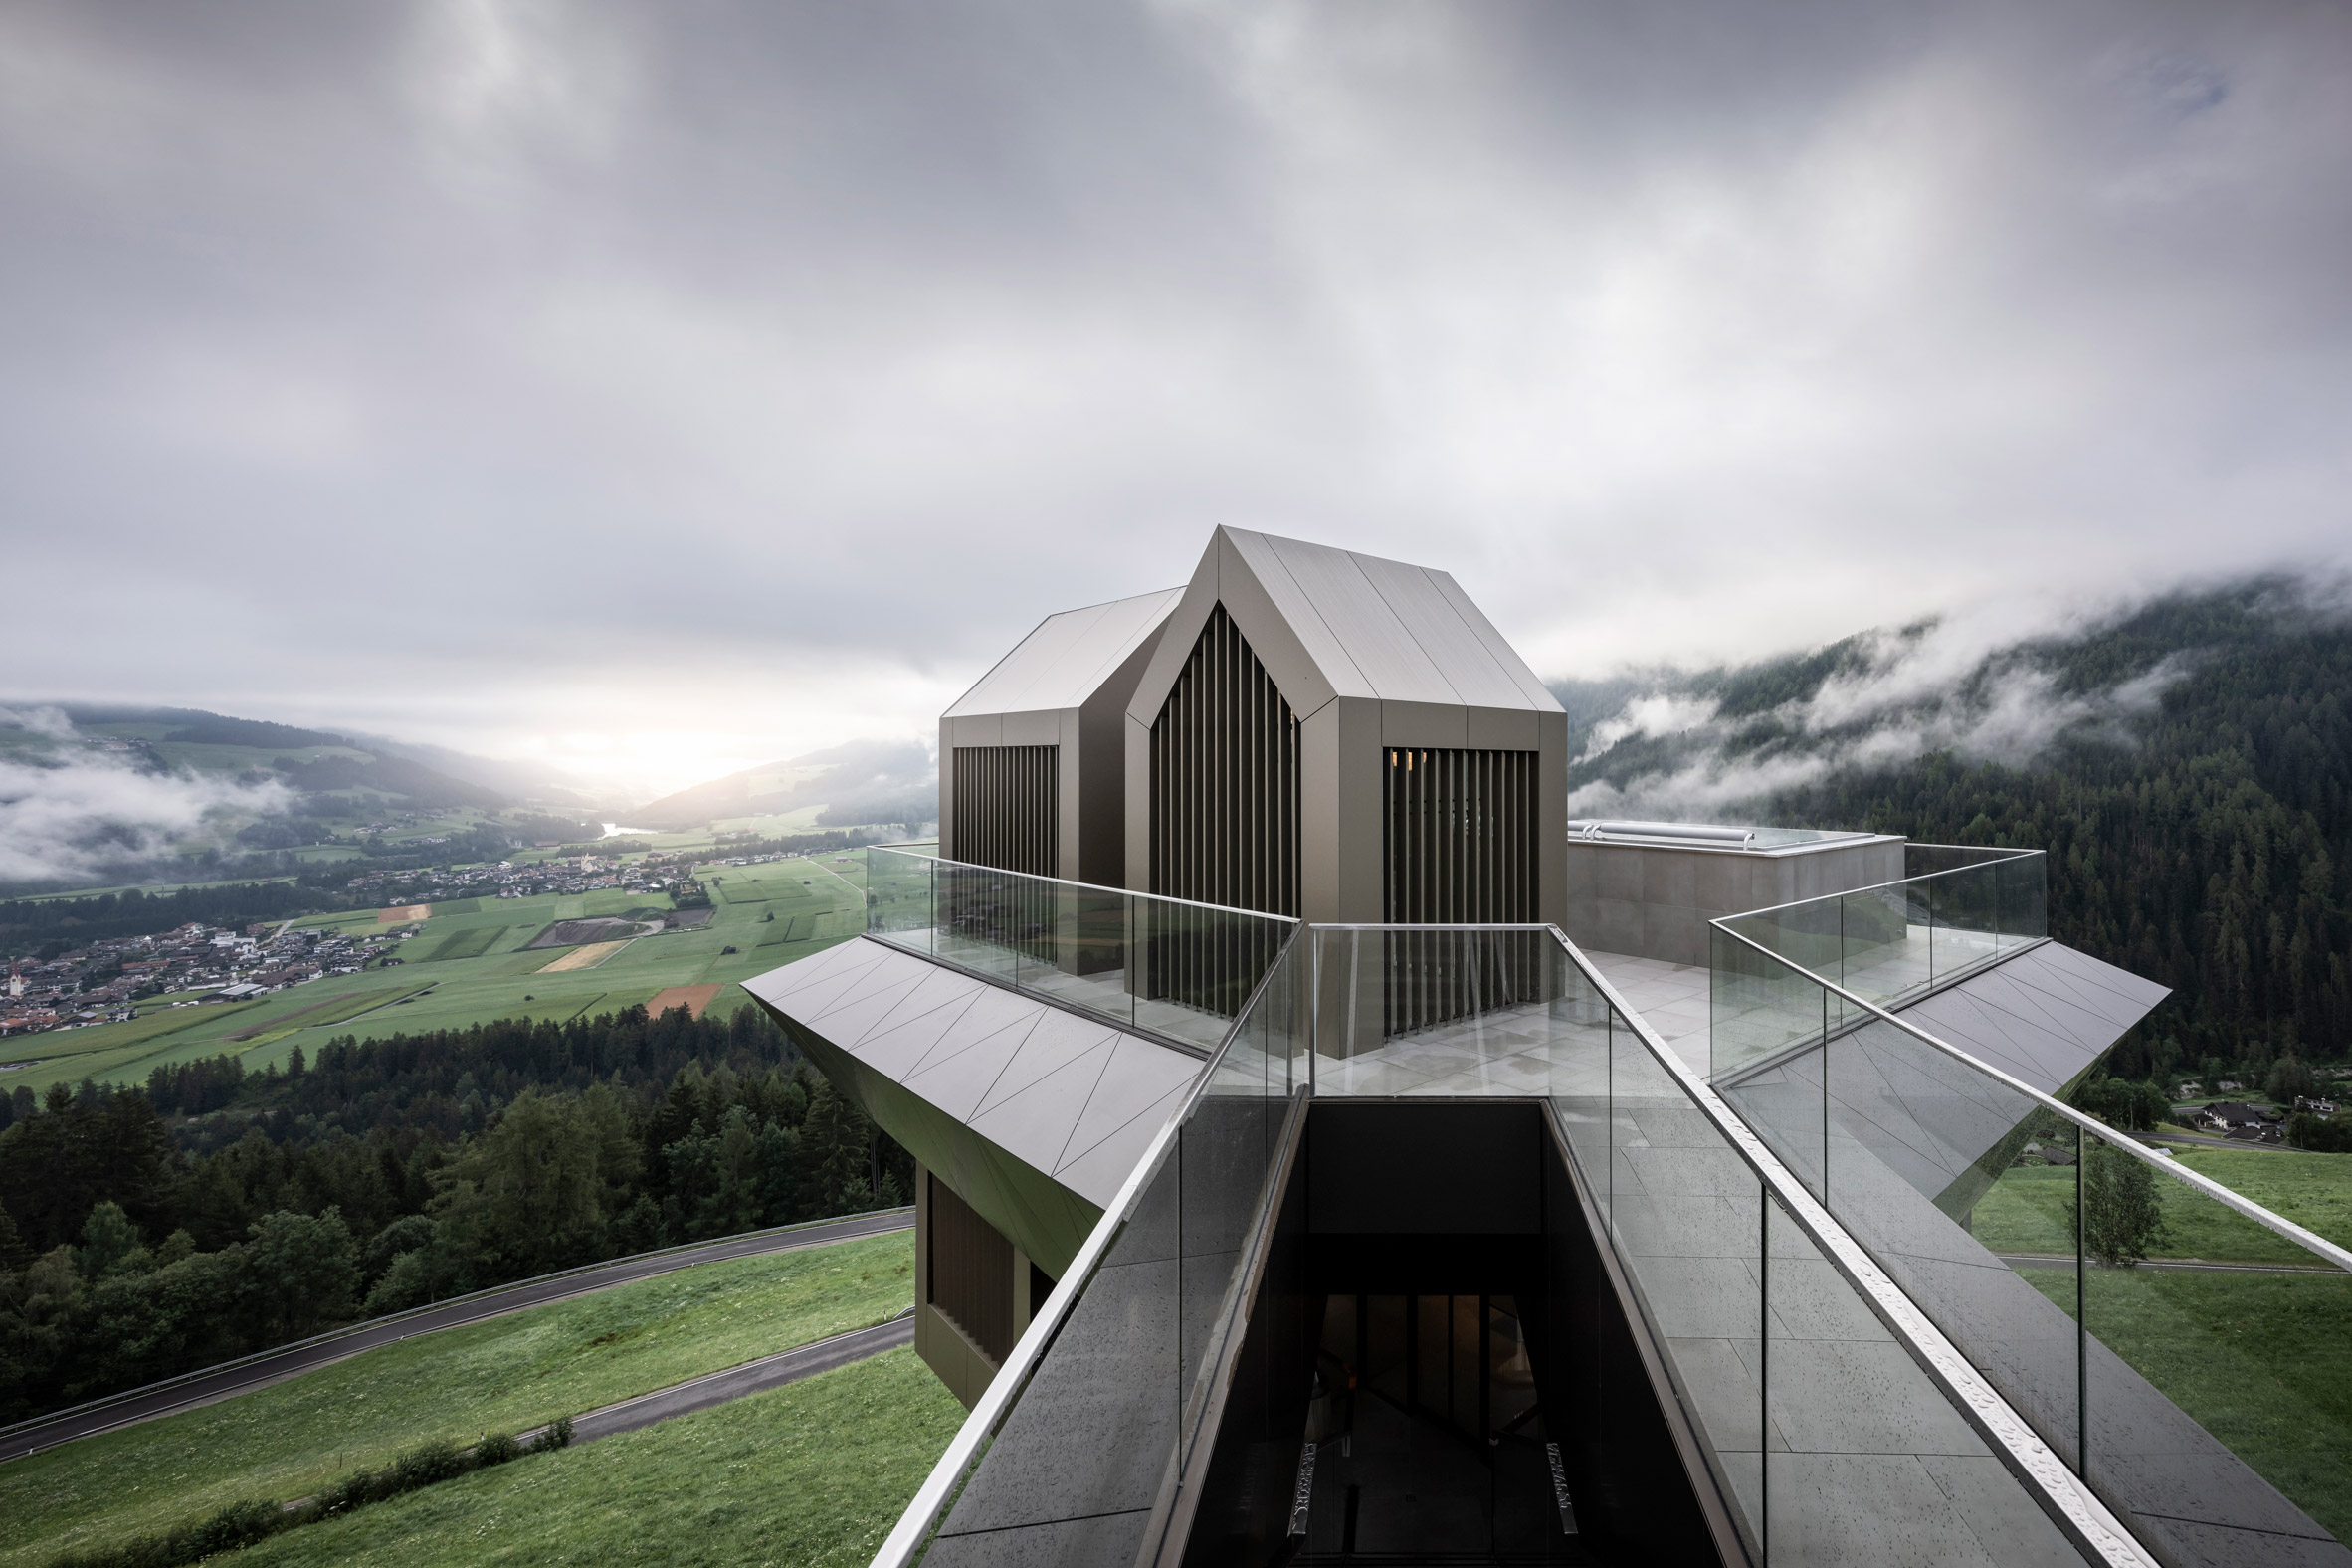 Suspended walkway to Hub of Huts in South Tyrol